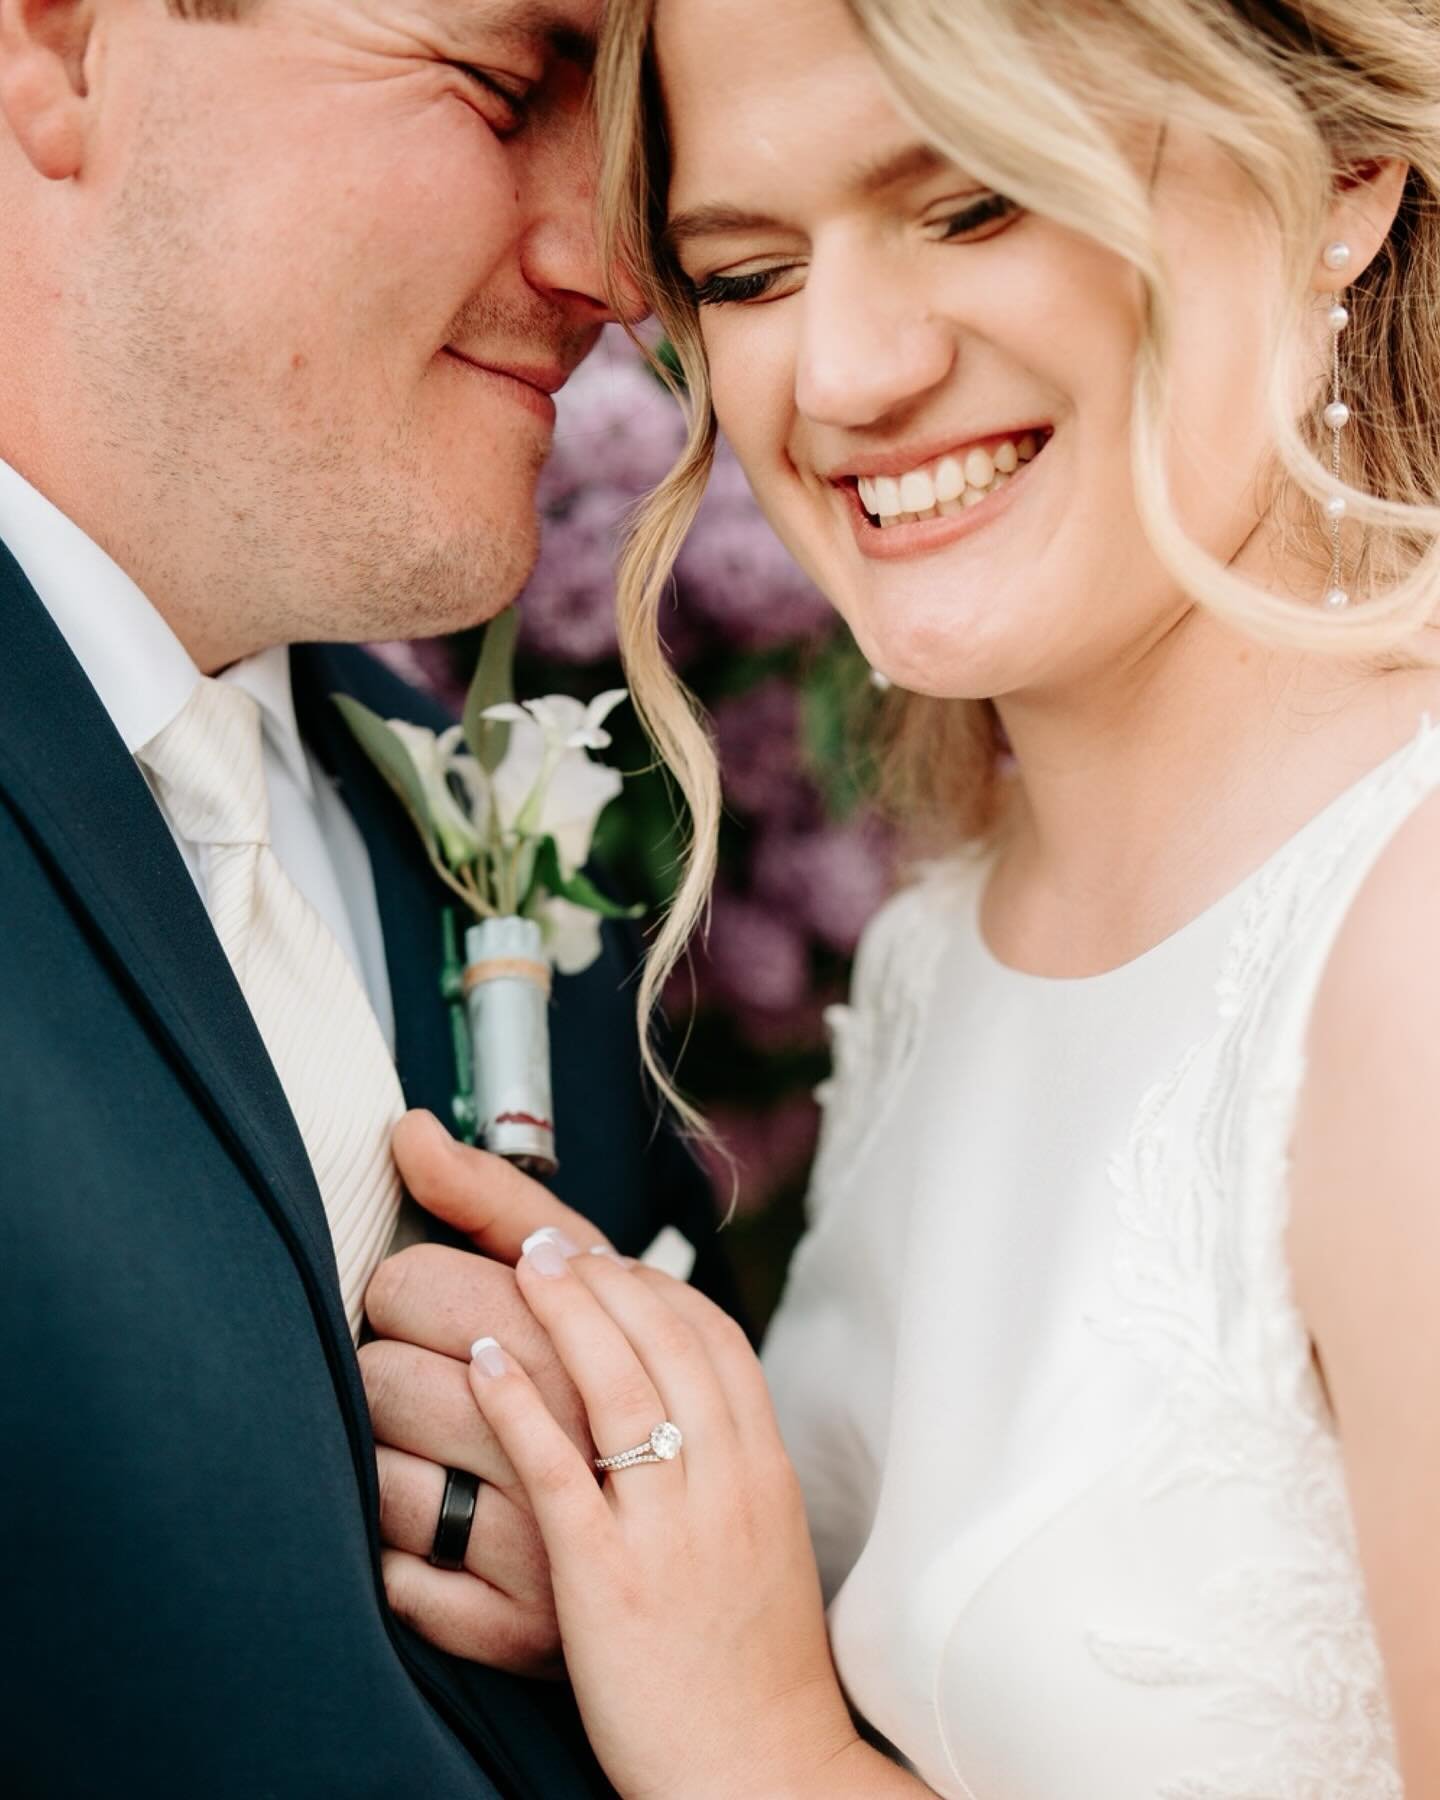 The perfect spring day! Peep the end for the cutest fishing photo. There is just something so special when couples incorporate little touches of things they enjoy together.

Milwaukee Wedding Photography 
Milwaukee Wedding Photographer
Lake Geneva We